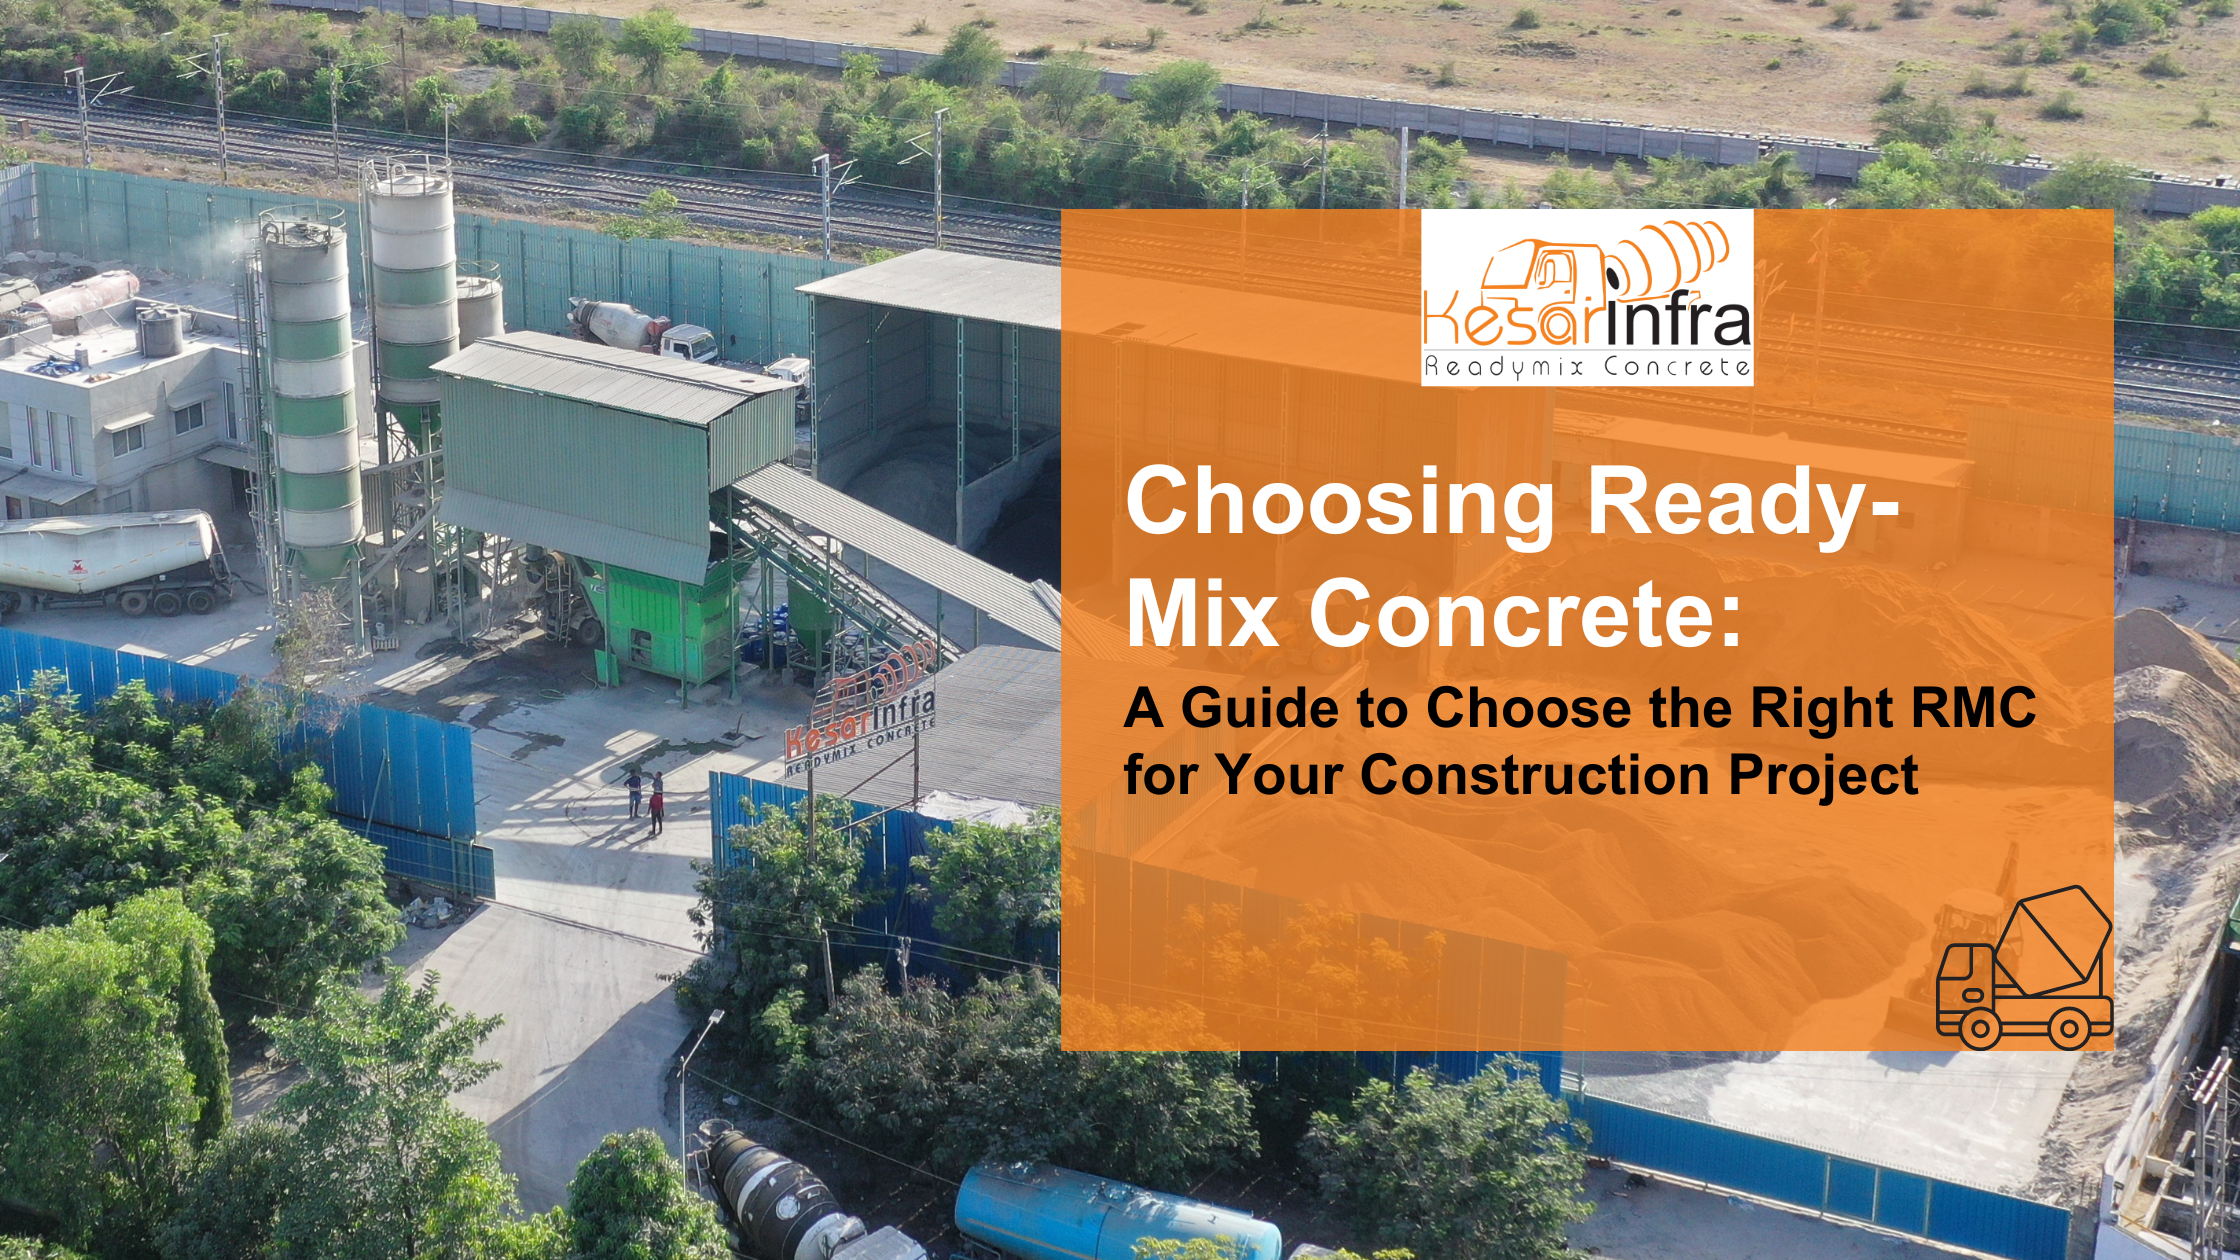 Choosing Ready-Mix Concrete:  A Guide to Choose the Right RMC for Your Construction Project